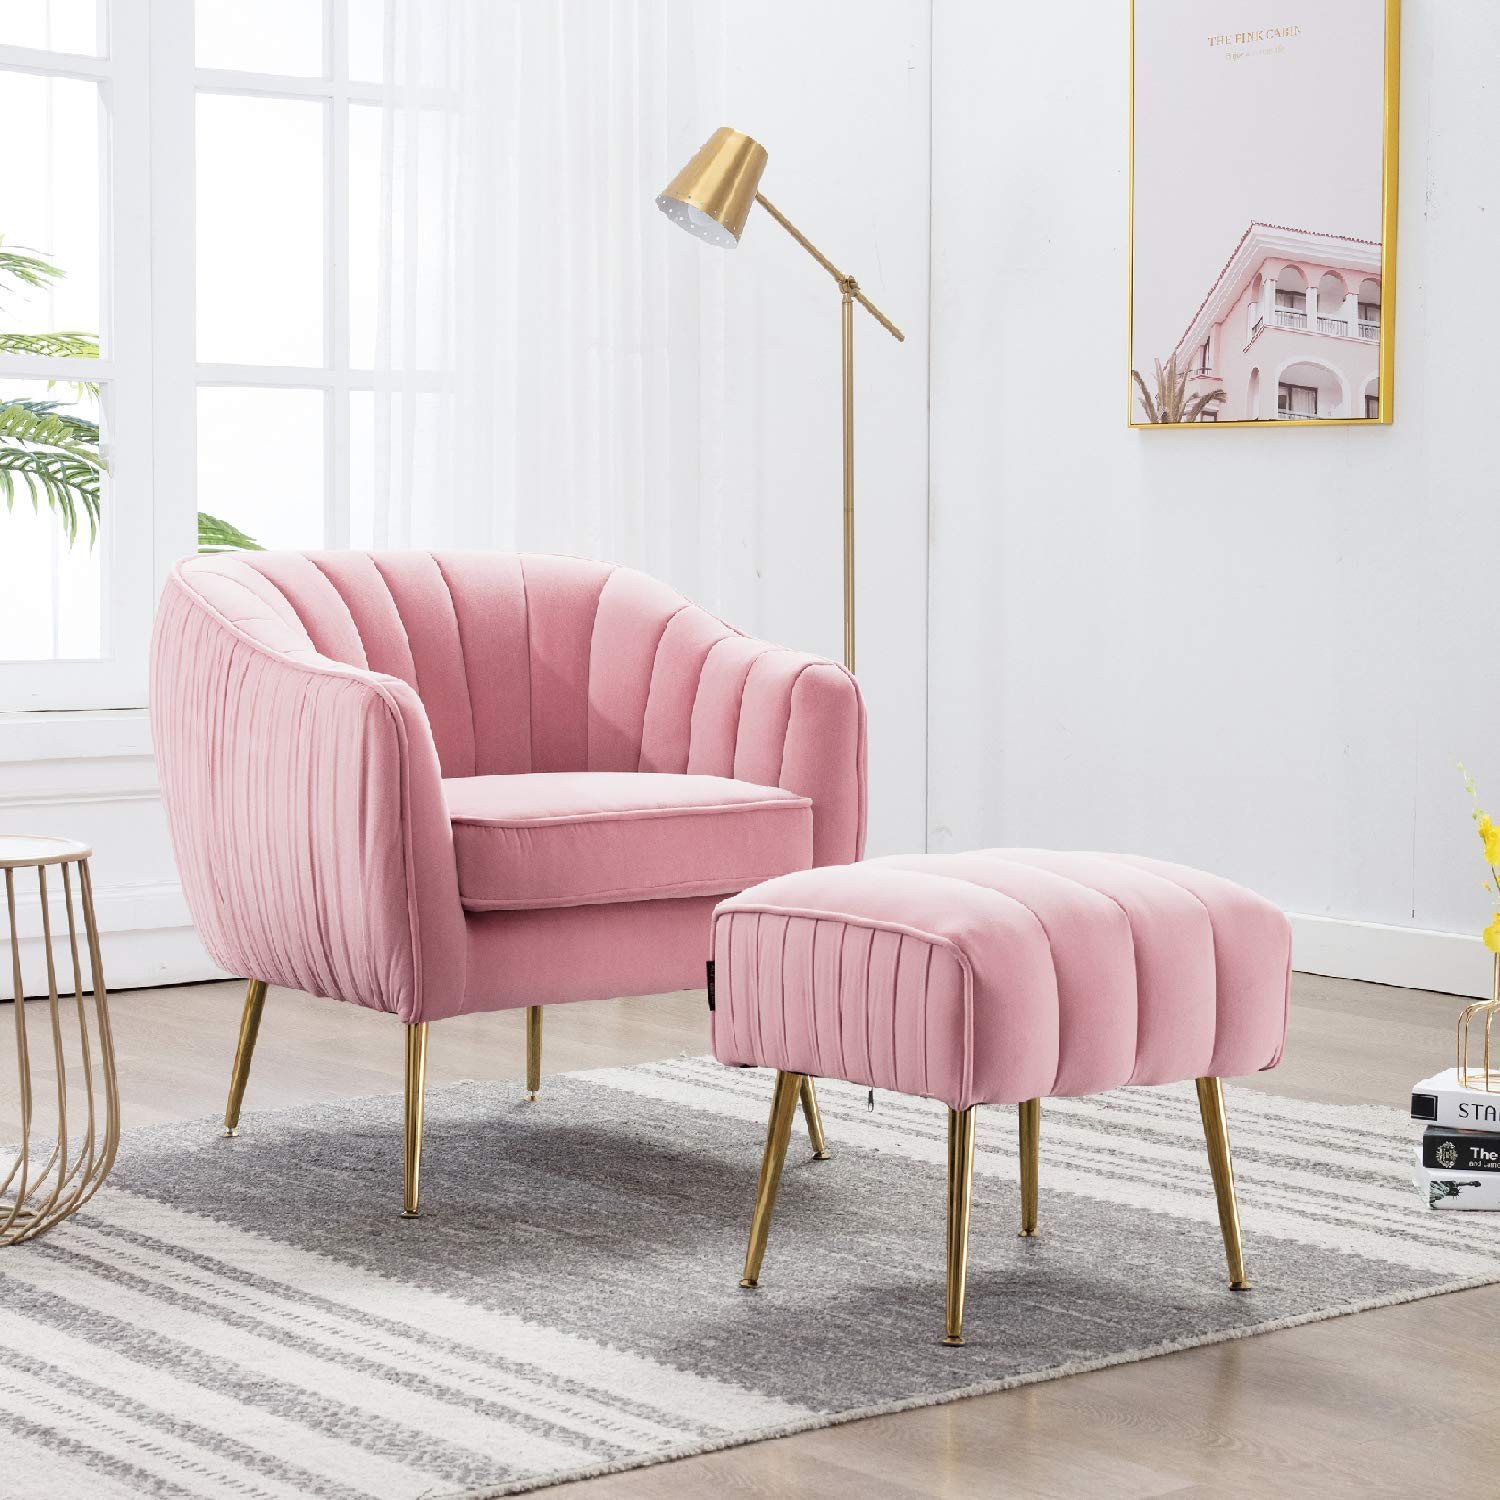 Comfy Reading Chair for Bedroom Luxury Altrobene Modern Accent Club Chair Ottoman Set Velvet Upholstered Curved Tufted Gold Finished Metal Legs for Living Room Bedroom Pink